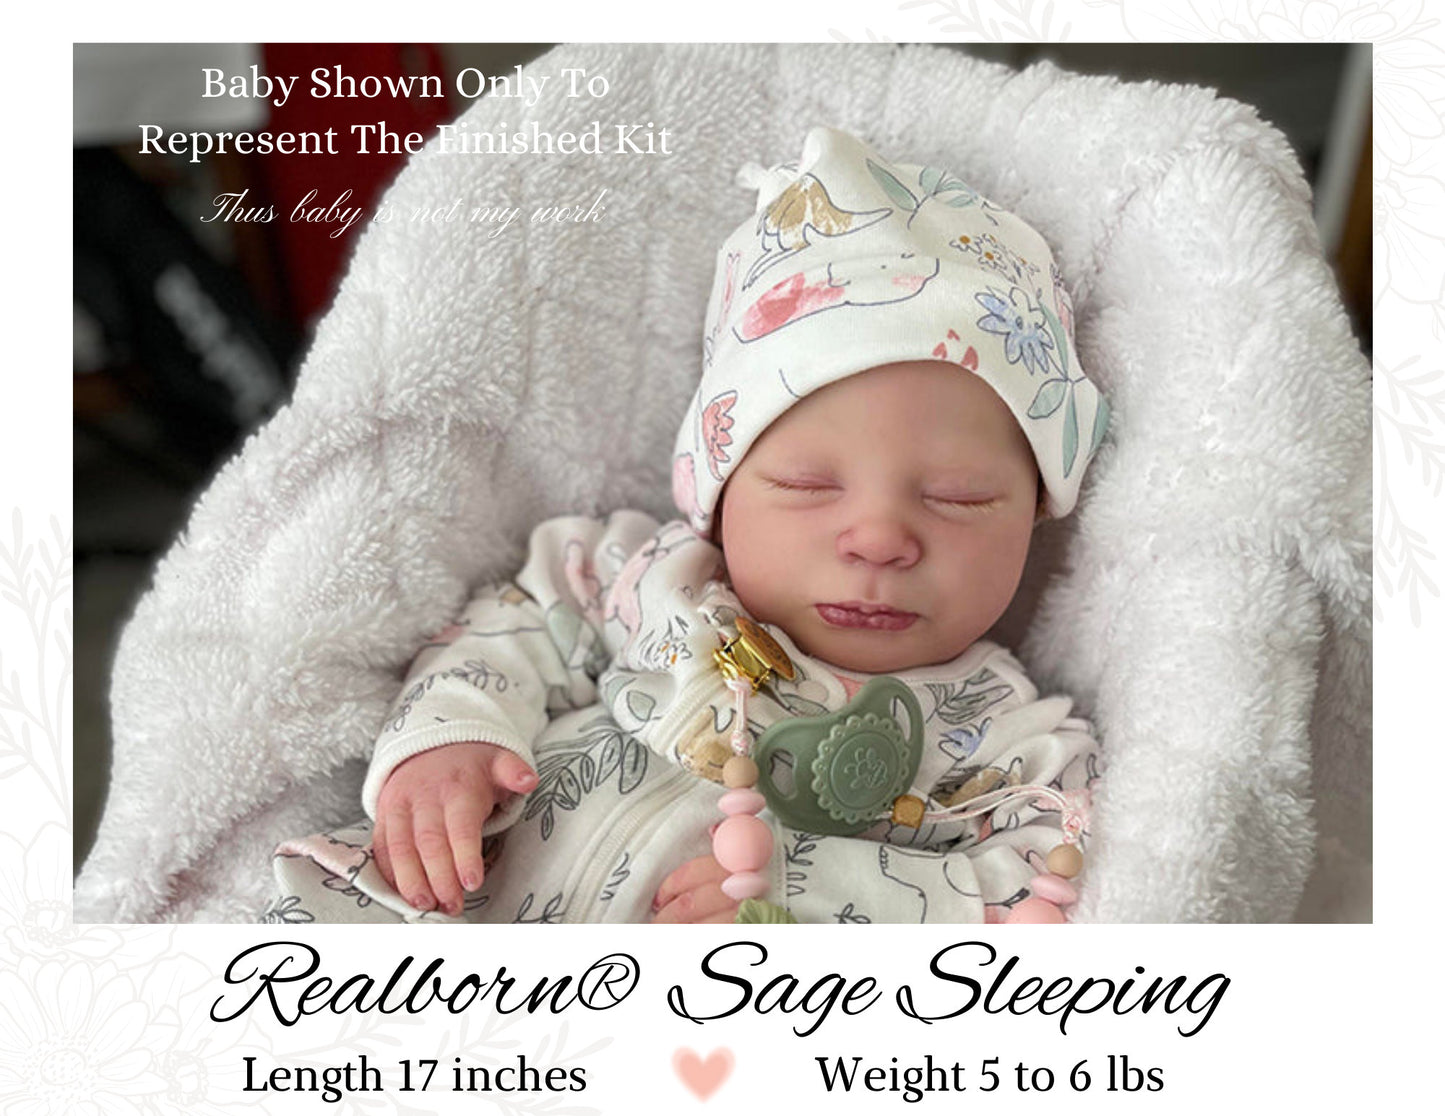 SiLiCoNe BaBy Realborn® Sage Sleeping (18" Full Limbs) with cloth body. Extended Processing Time May Be Required. ASK FIRST!